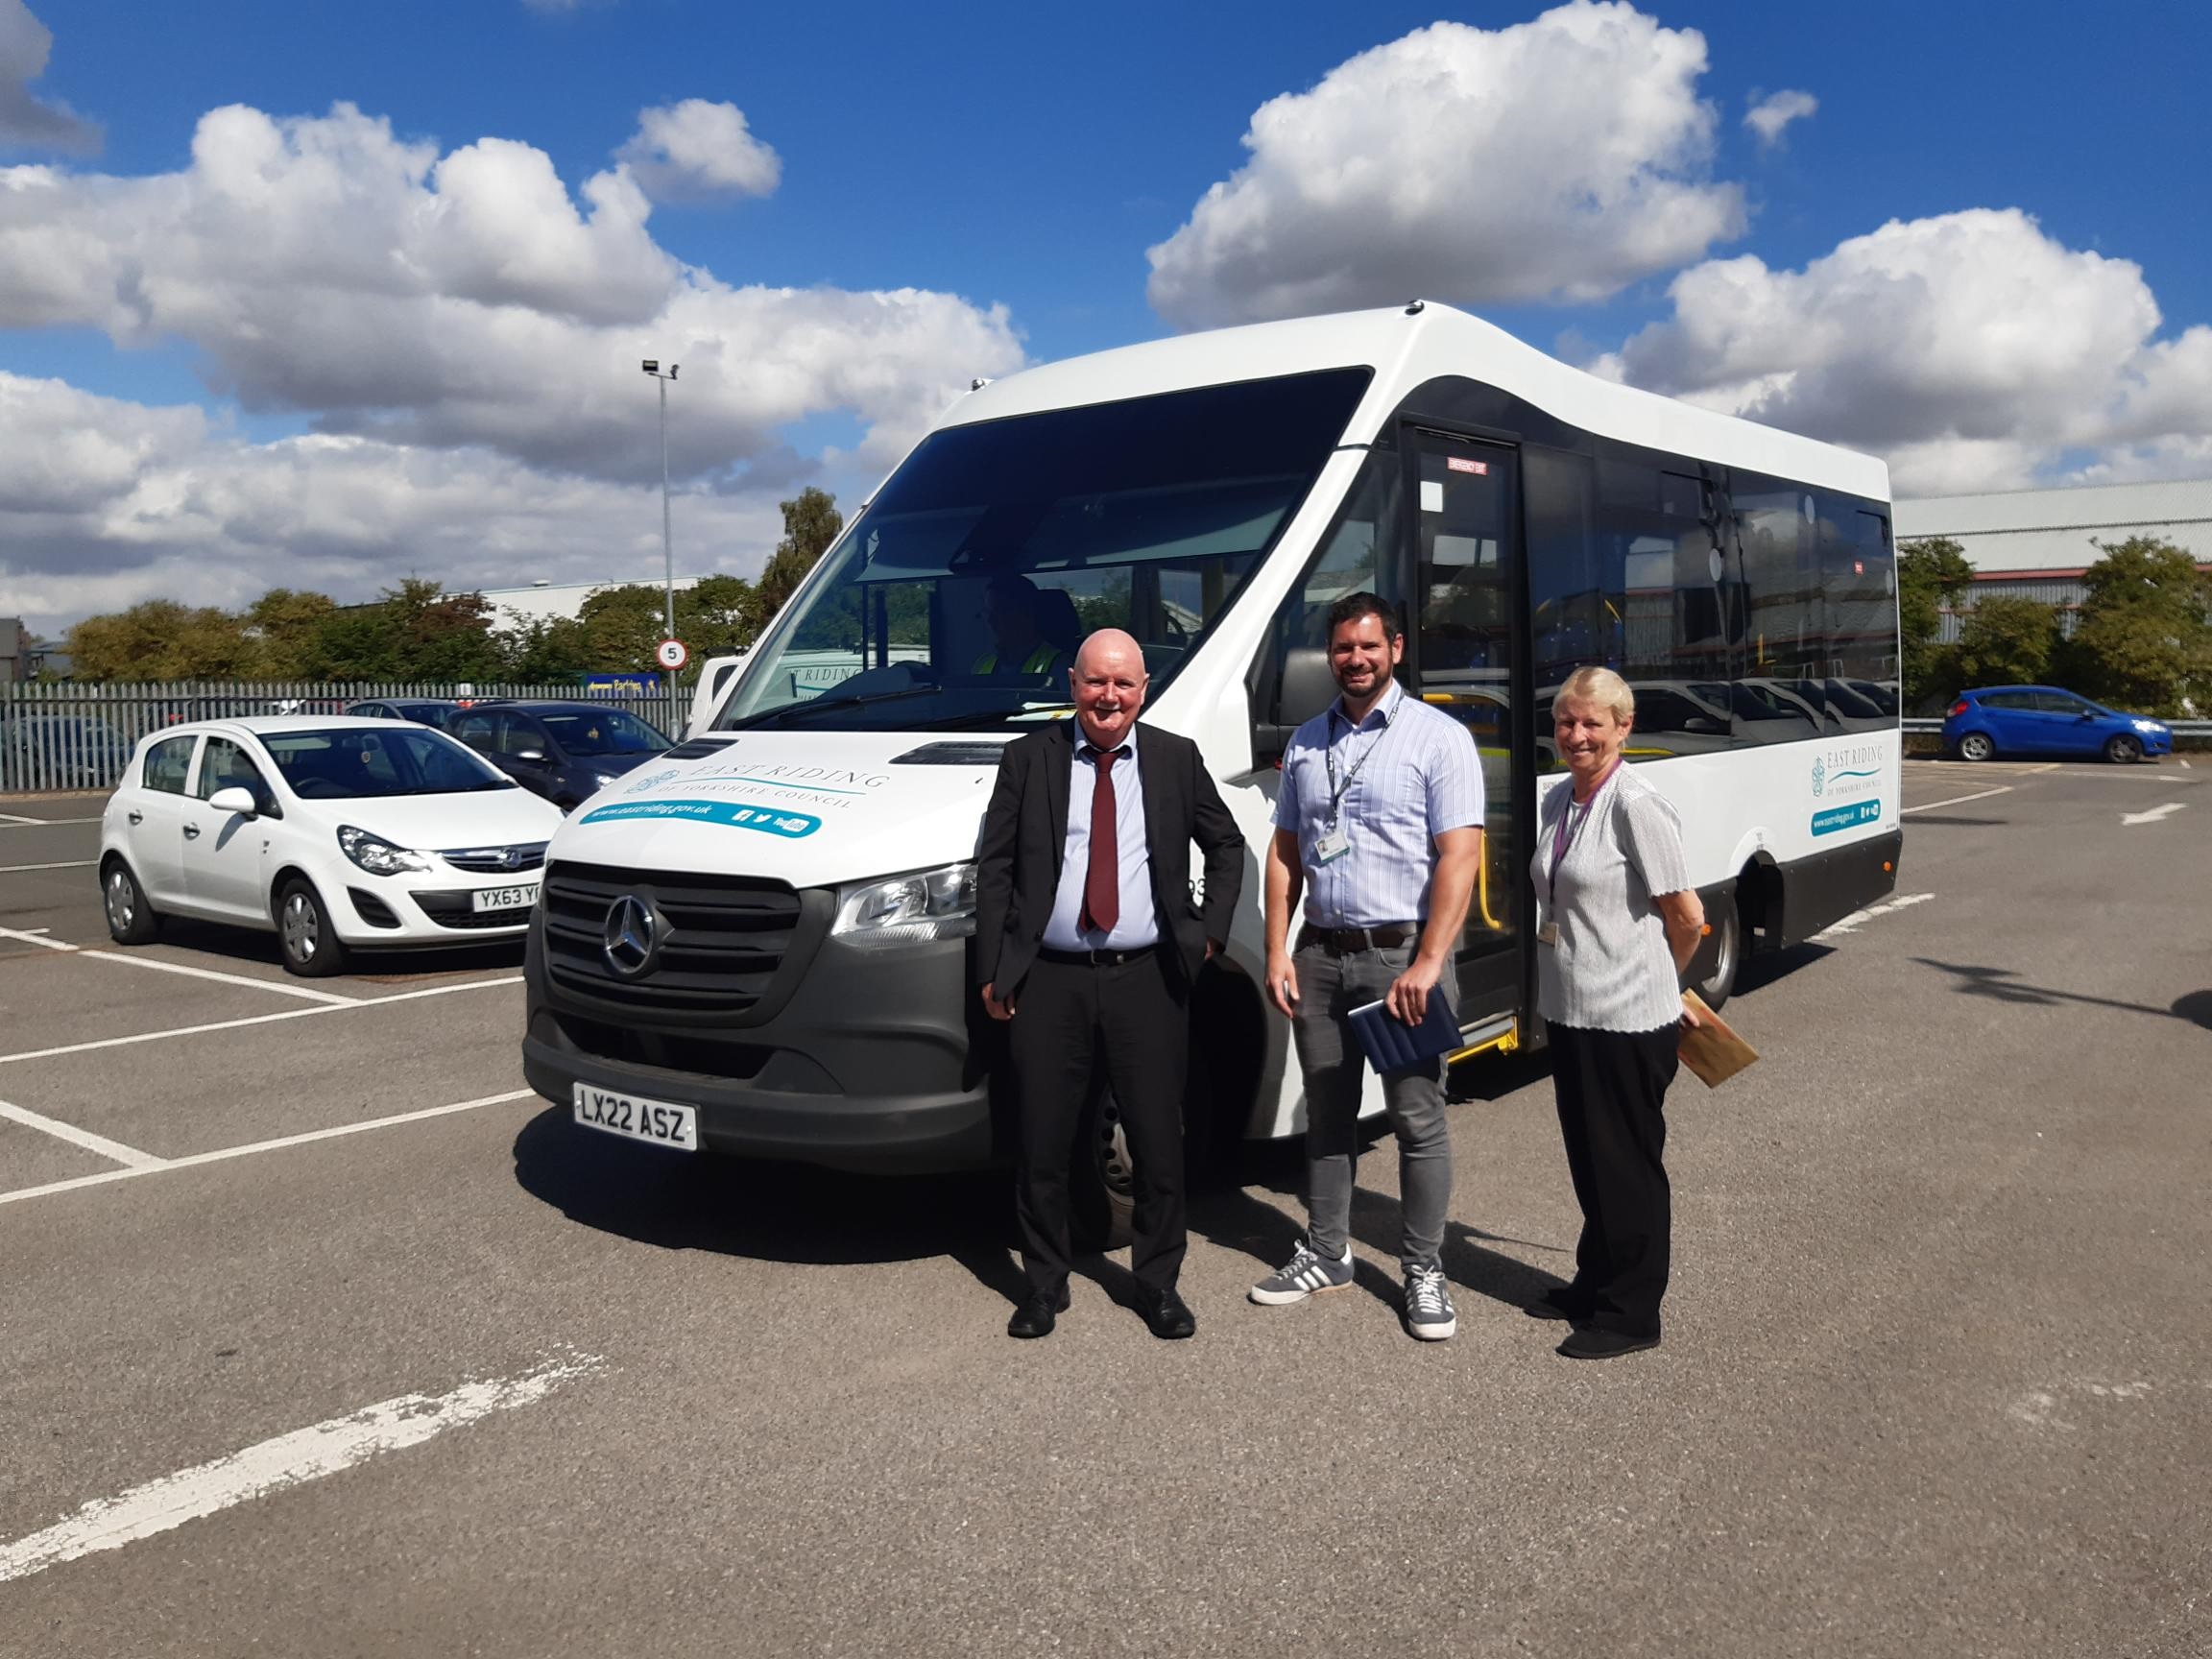 10 Mellor Strata high floor minibuses delivered to East Riding of Yorkshire Council